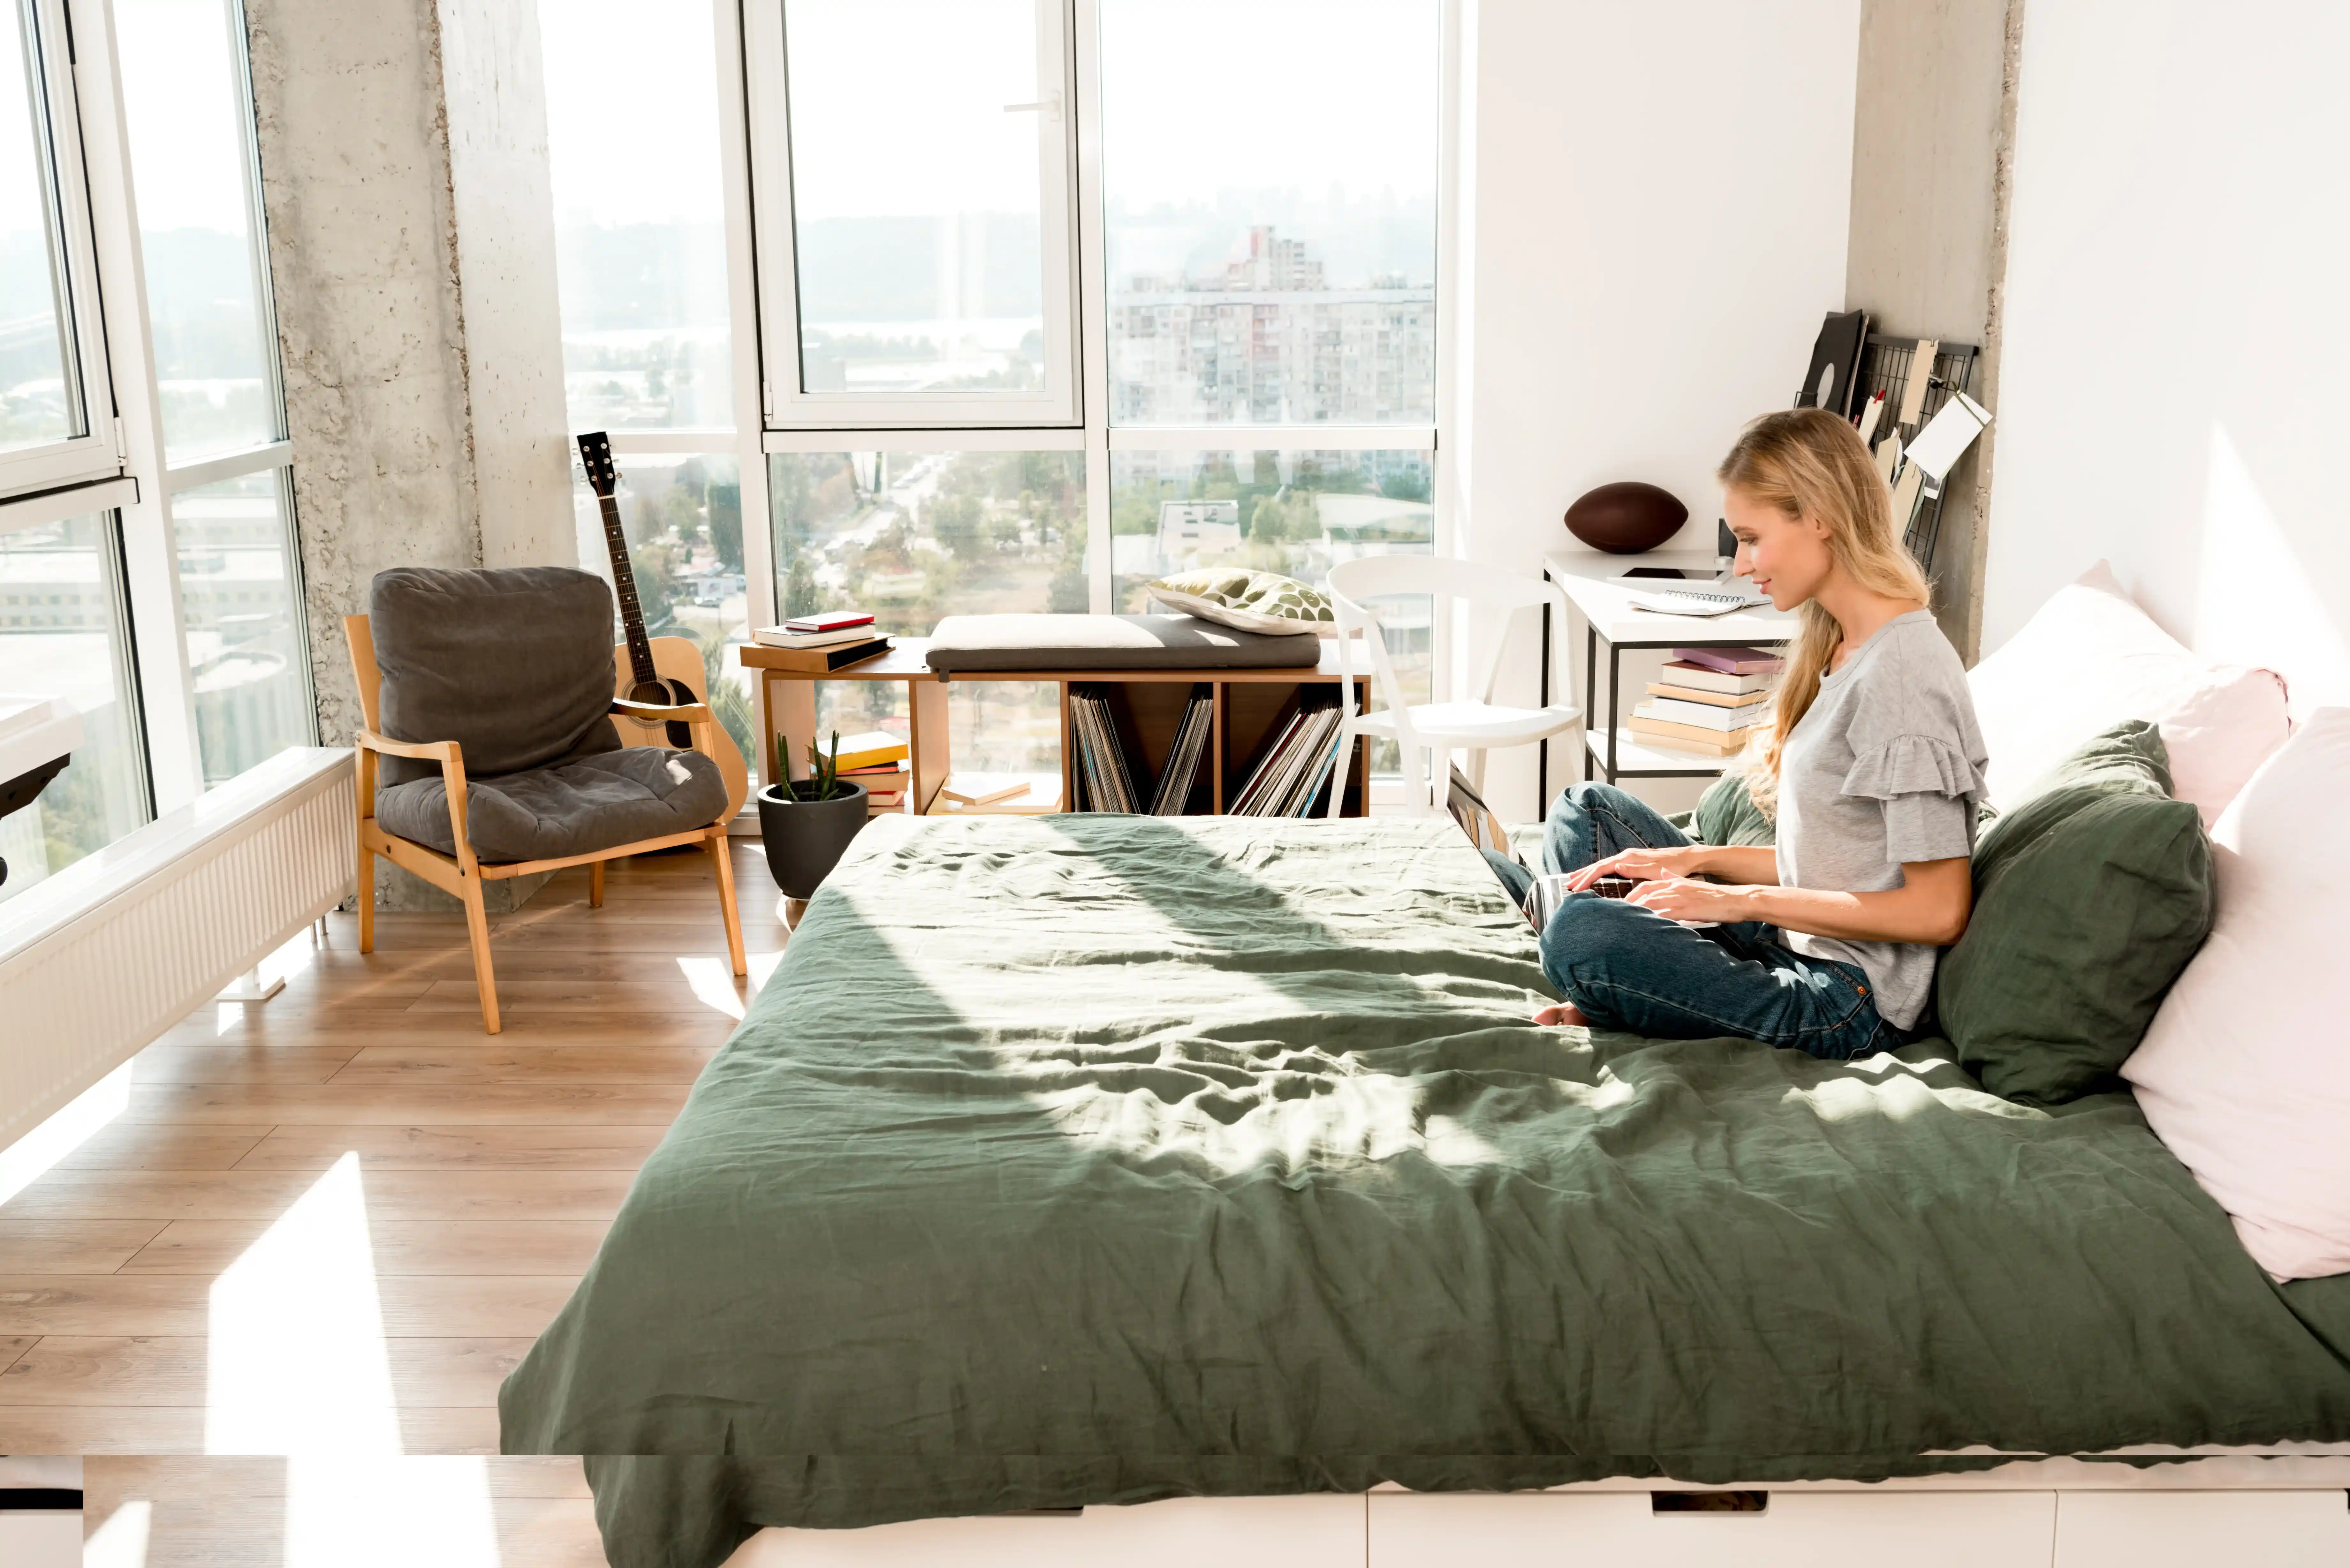  A person is sitting on a bed with a green duvet, using a laptop, in a bright room with a scenic city view through large windows.